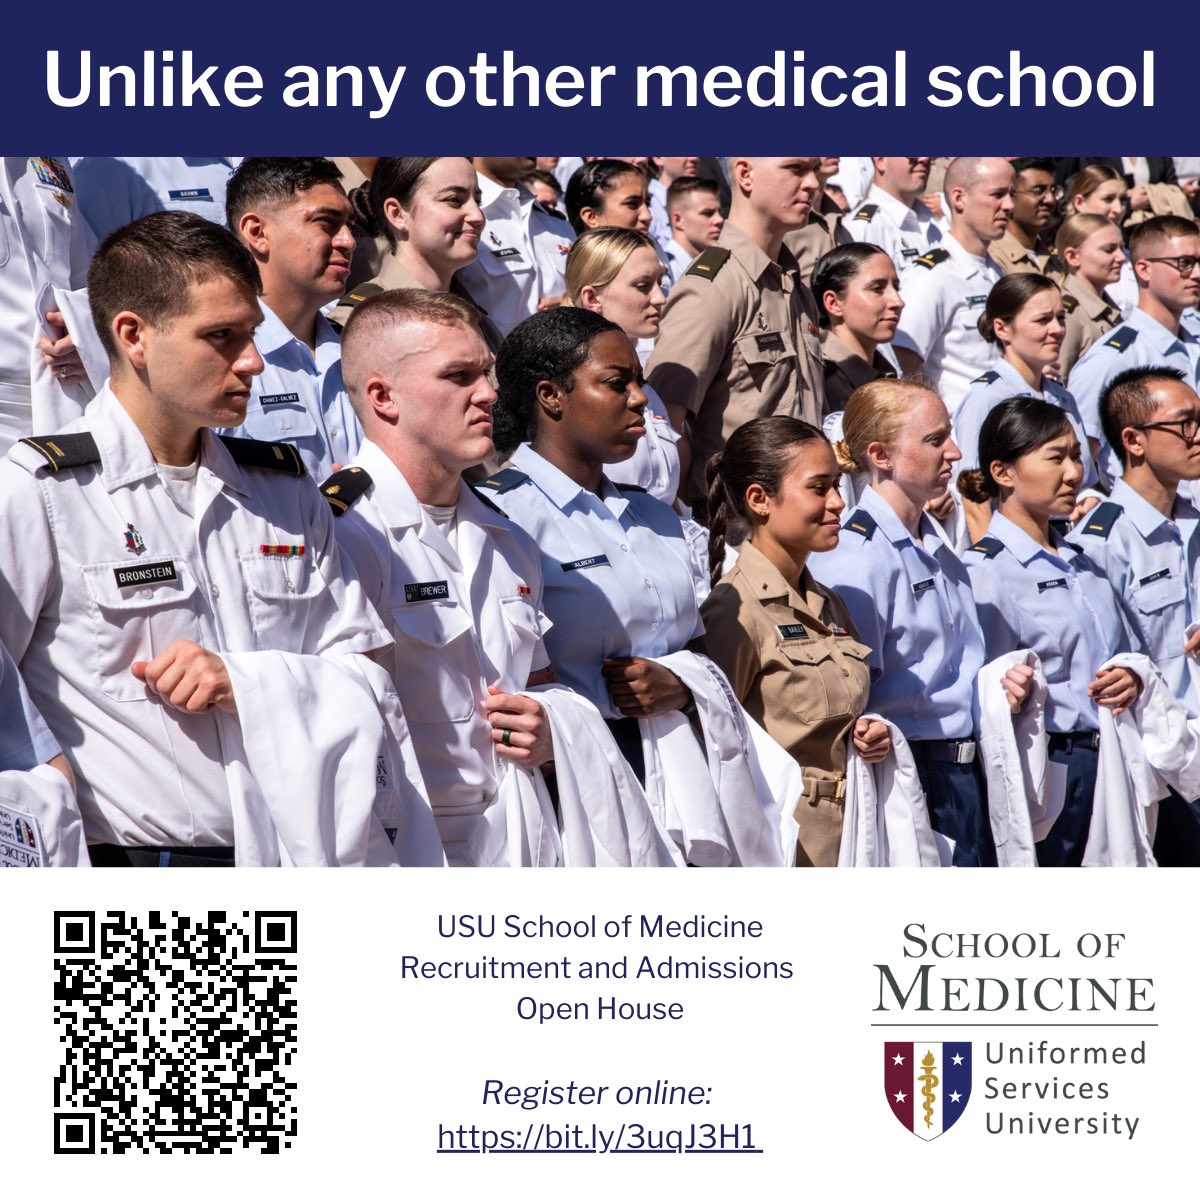 The leadership academy of military medicine Join us for our next open house! #medicalschool #premed #admissions #militarymedicine